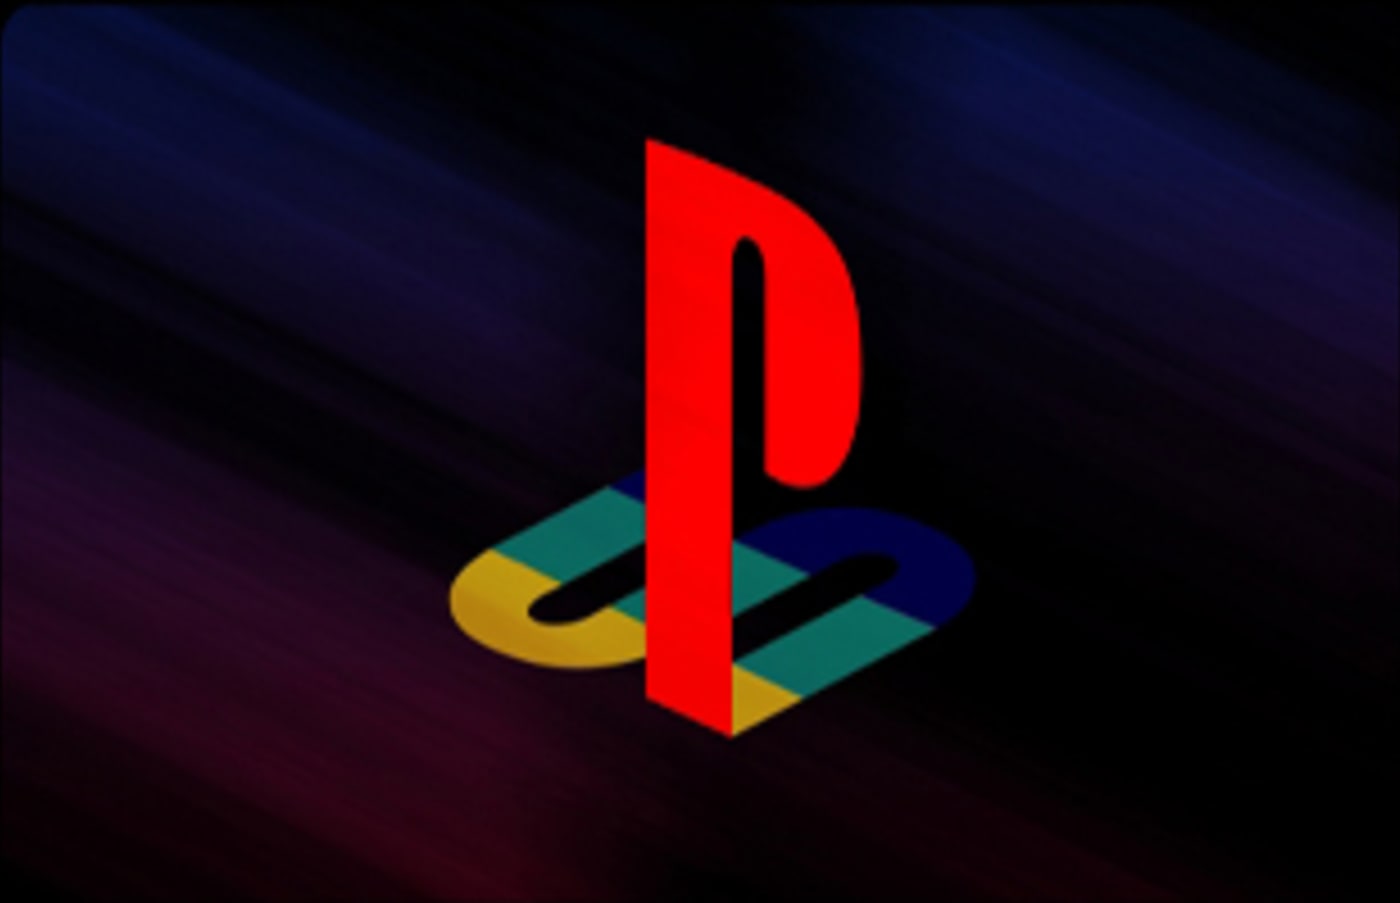 Playstation: Find The Latest Playstation Stories, News & Features